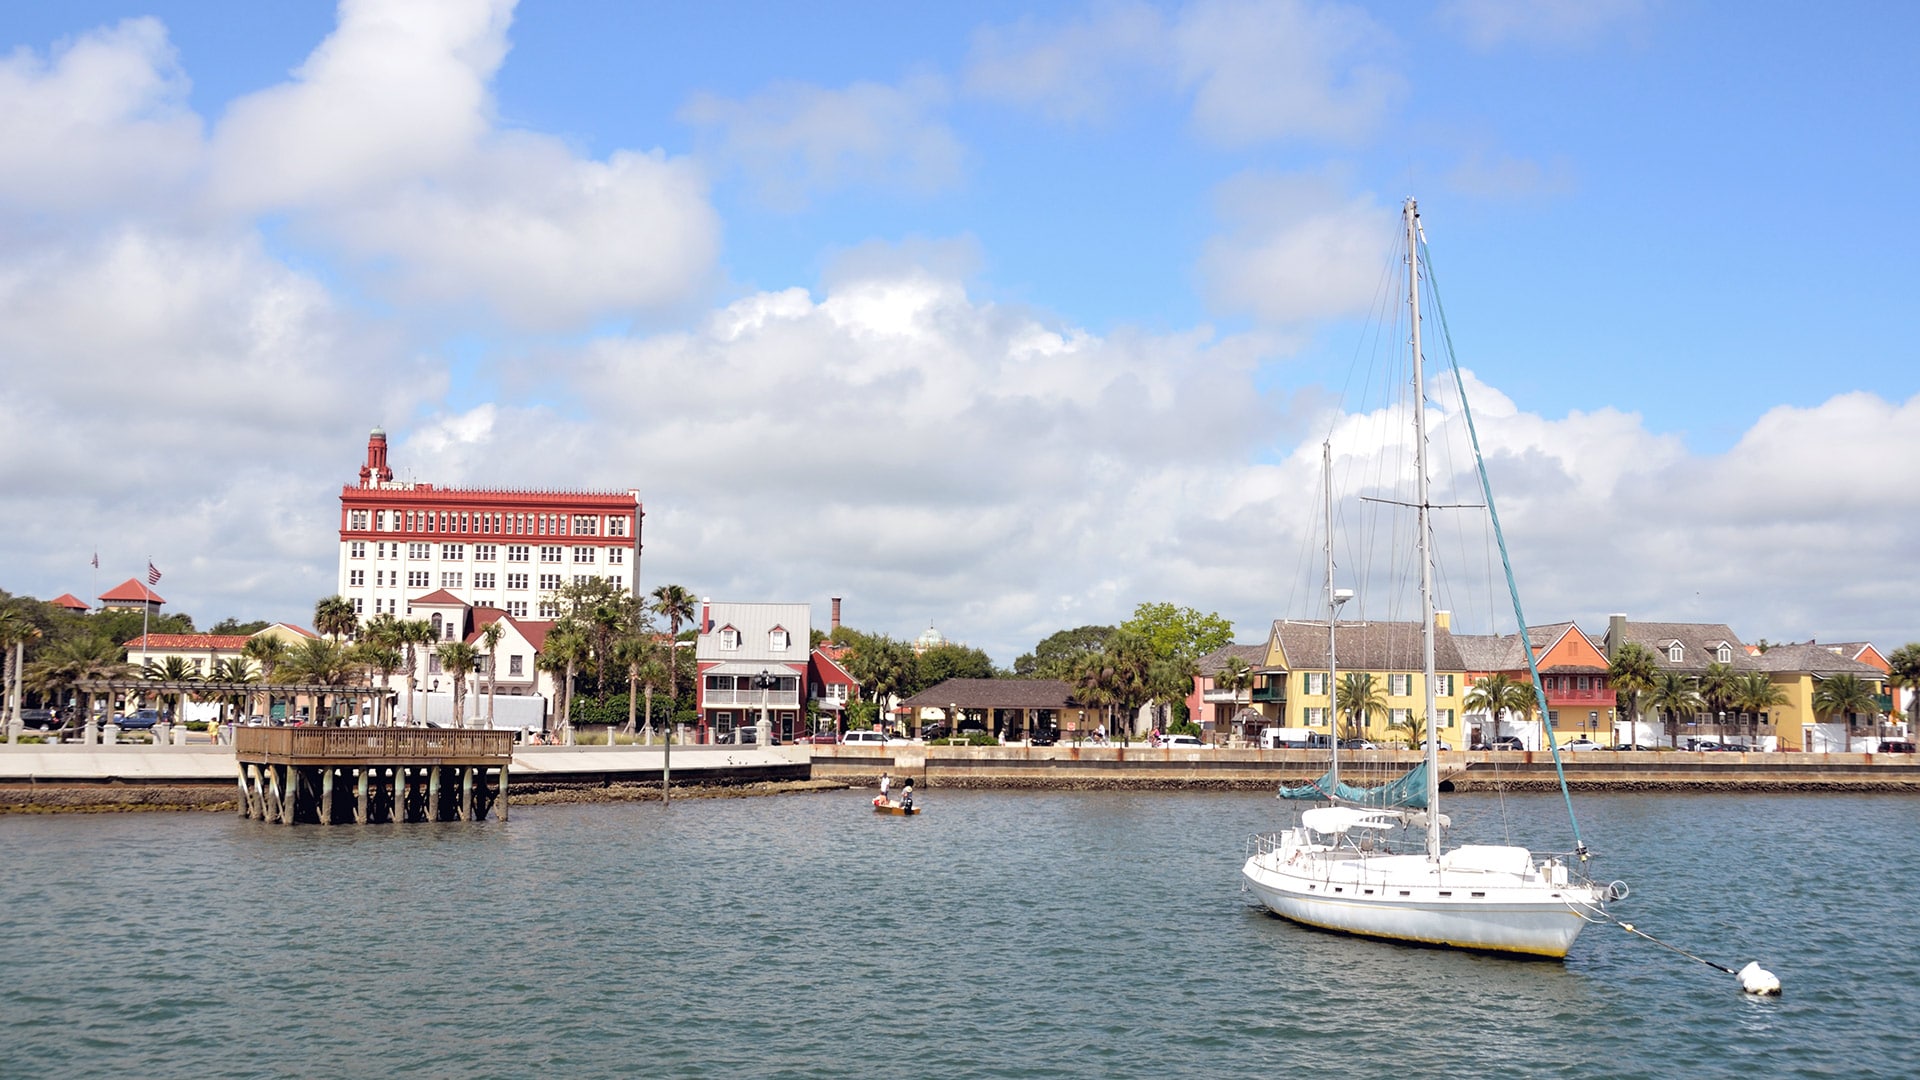 Riverfront in St. Augustine with sailboat in the water